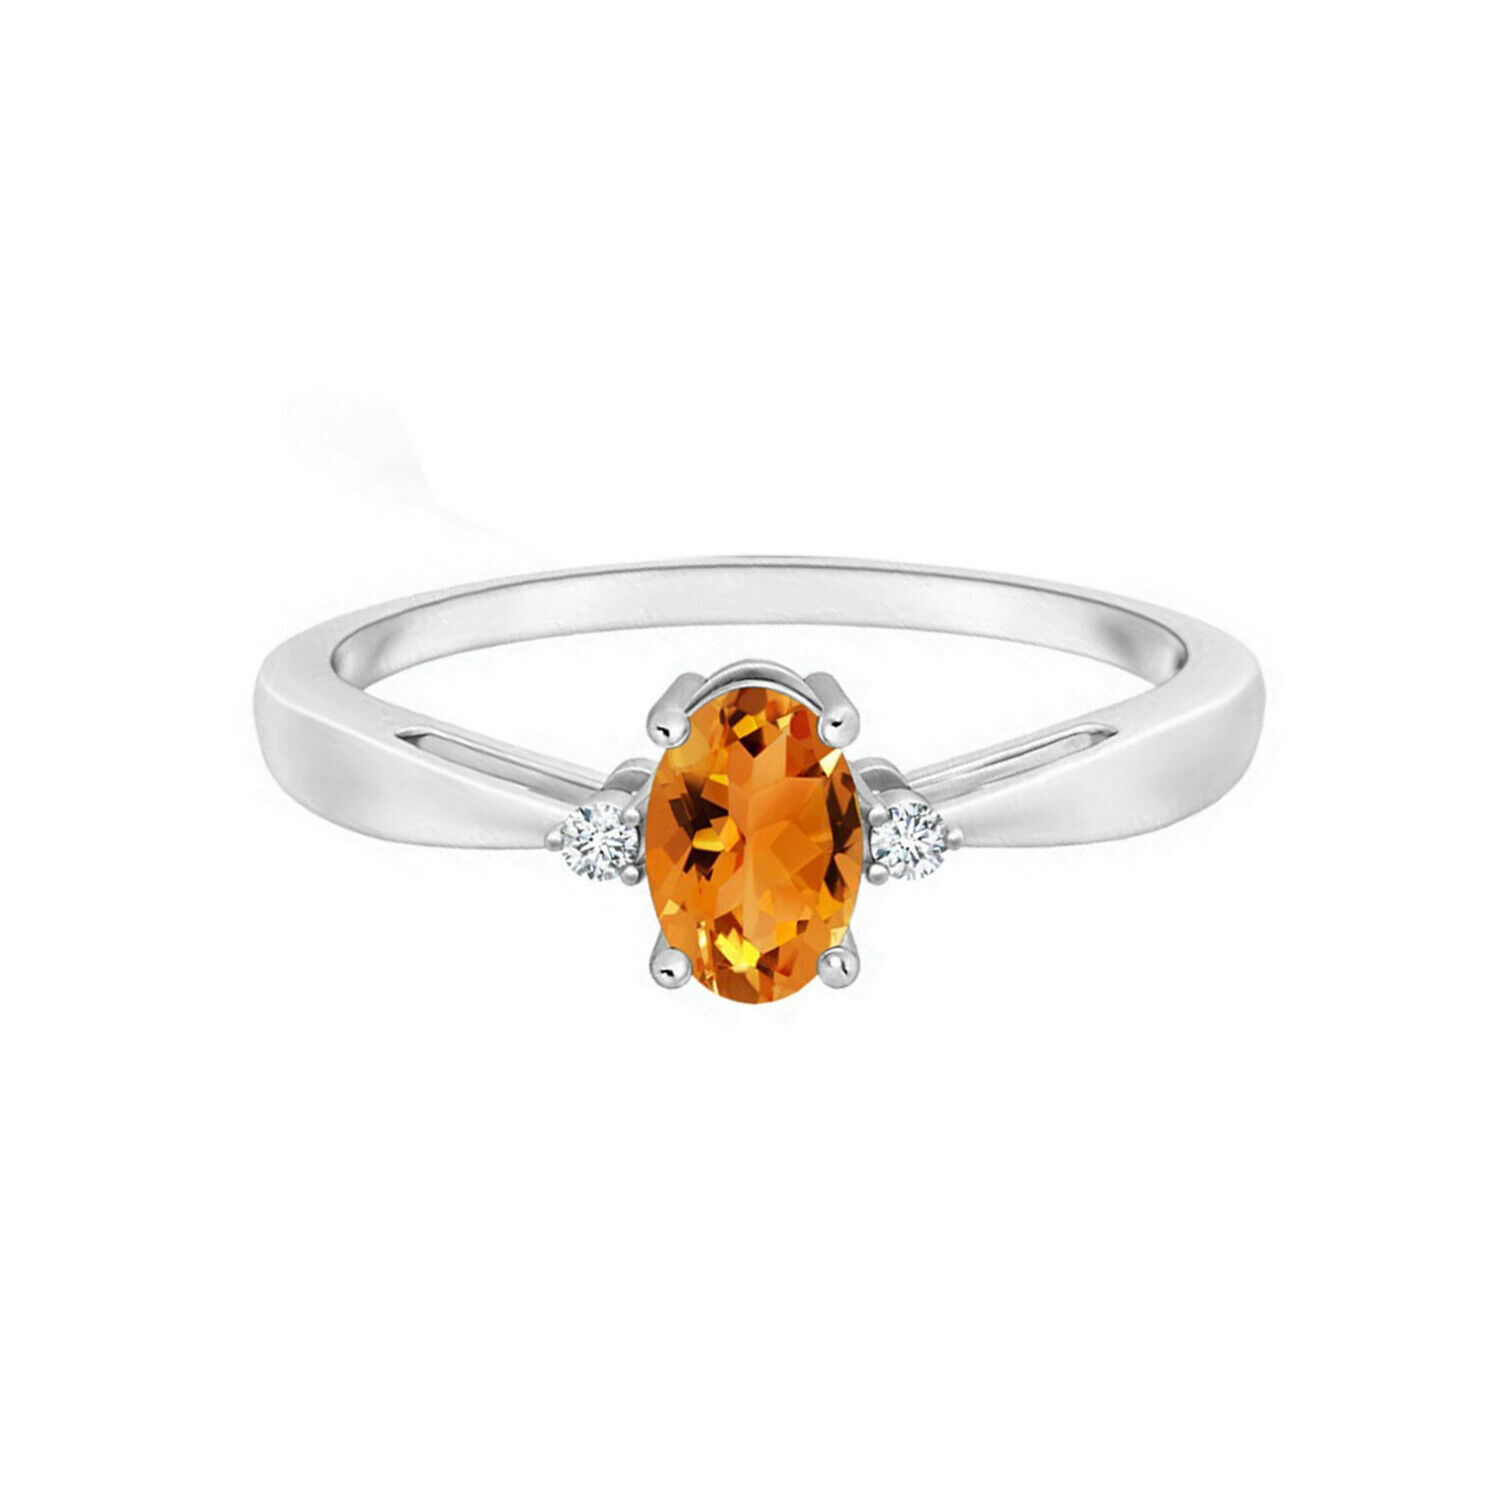 Kimaya Jewel - Tapered shank 0.25 cts oval citrine 10k white gold solitaire accents ring